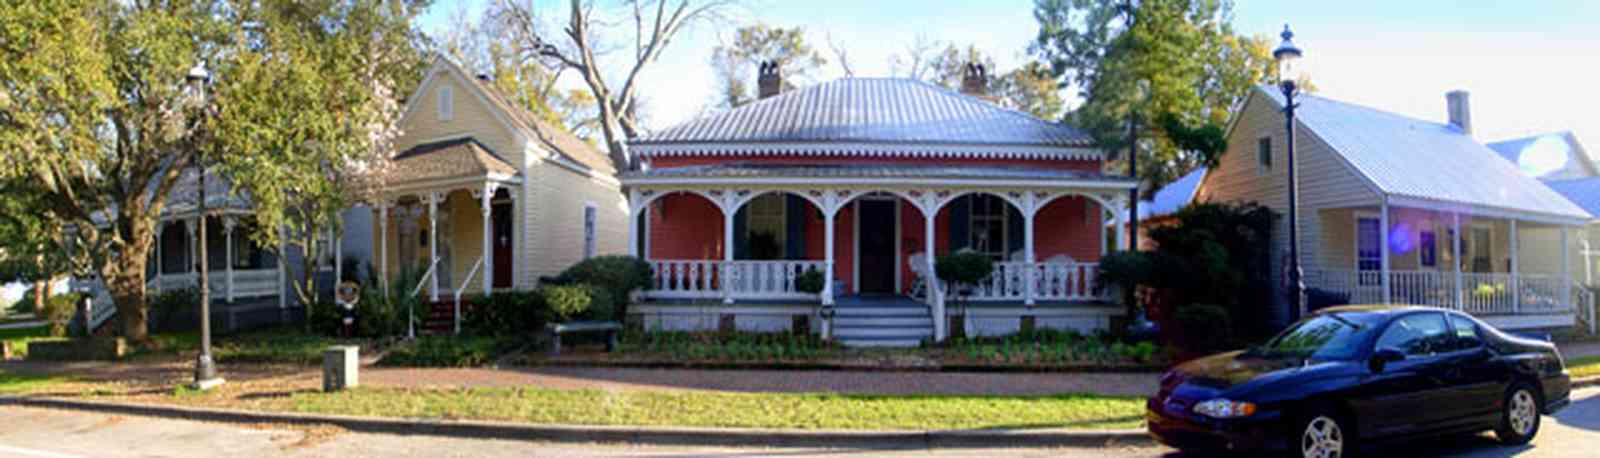 Pensacola:-Seville-Historic-District:-433-East-Zaragoza-Street_02.jpg:  pyramidal roof, four-square georgian architectural style, victorian house, victorian front porch, historic village